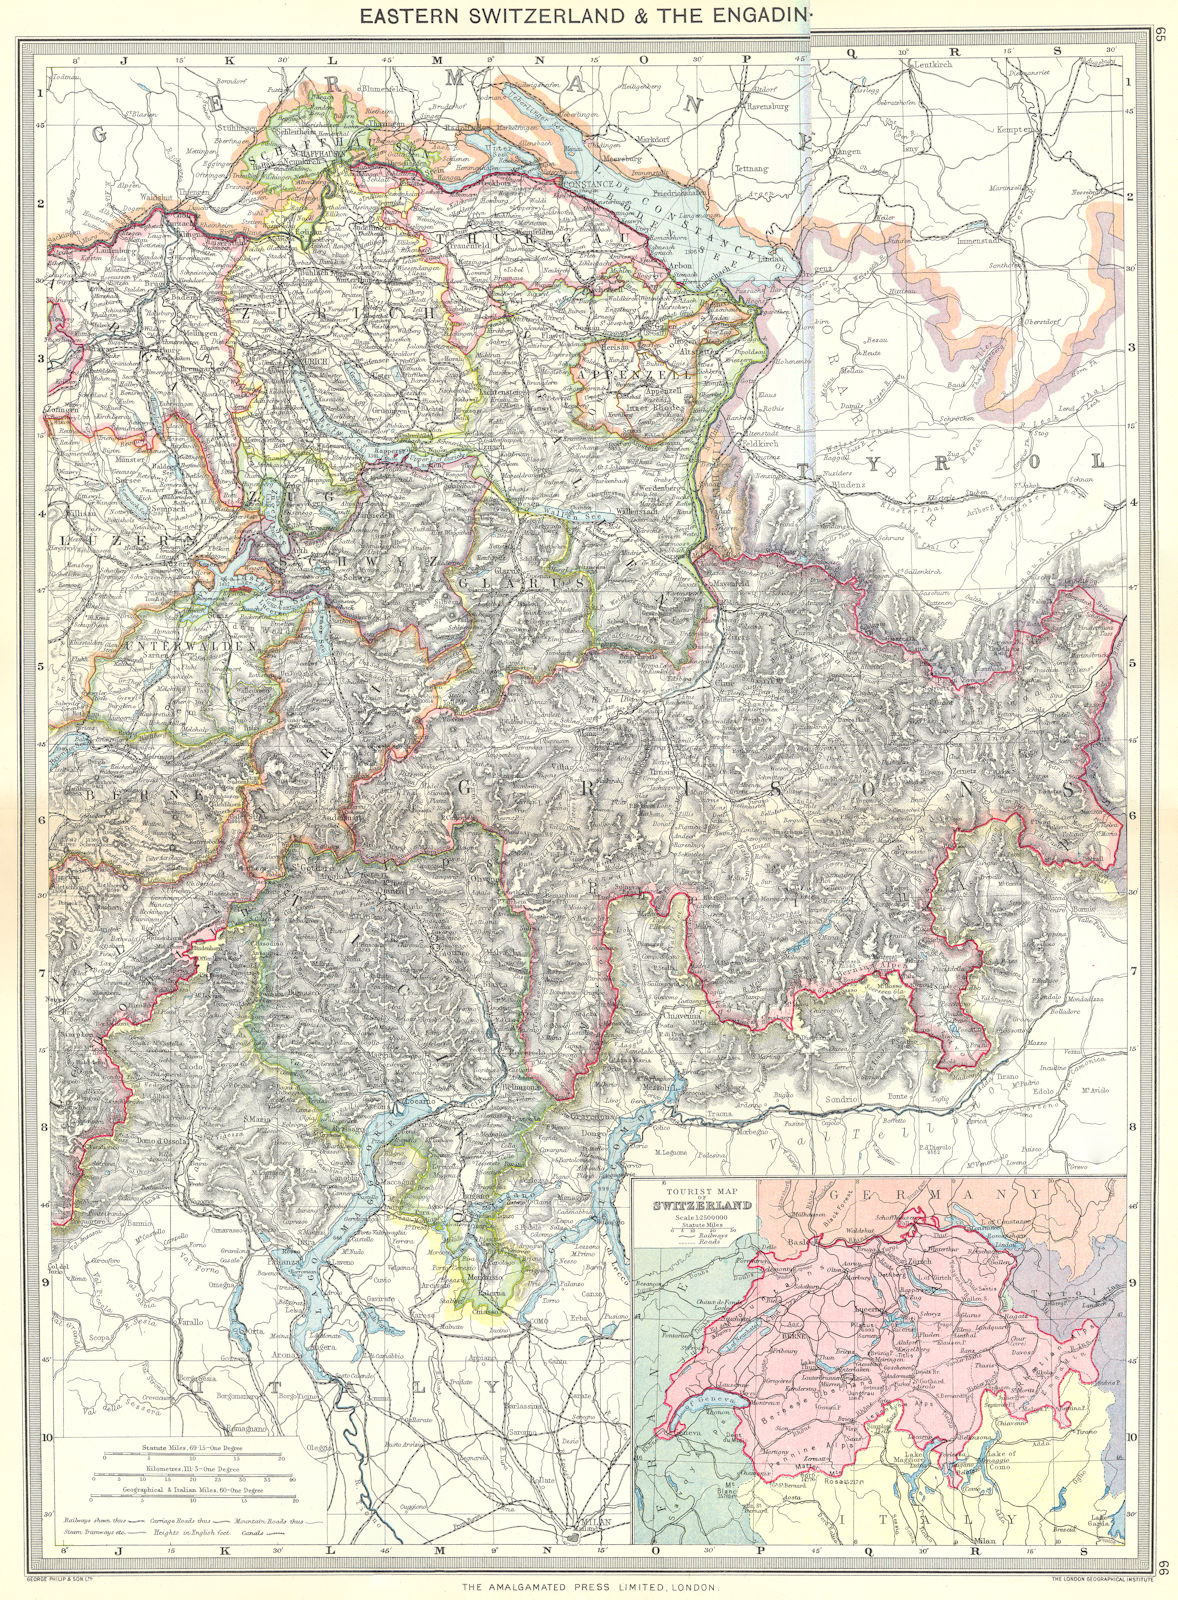 Associate Product SWITZERLAND. Eastern & Engadin; map of Tourist 1907 old antique plan chart